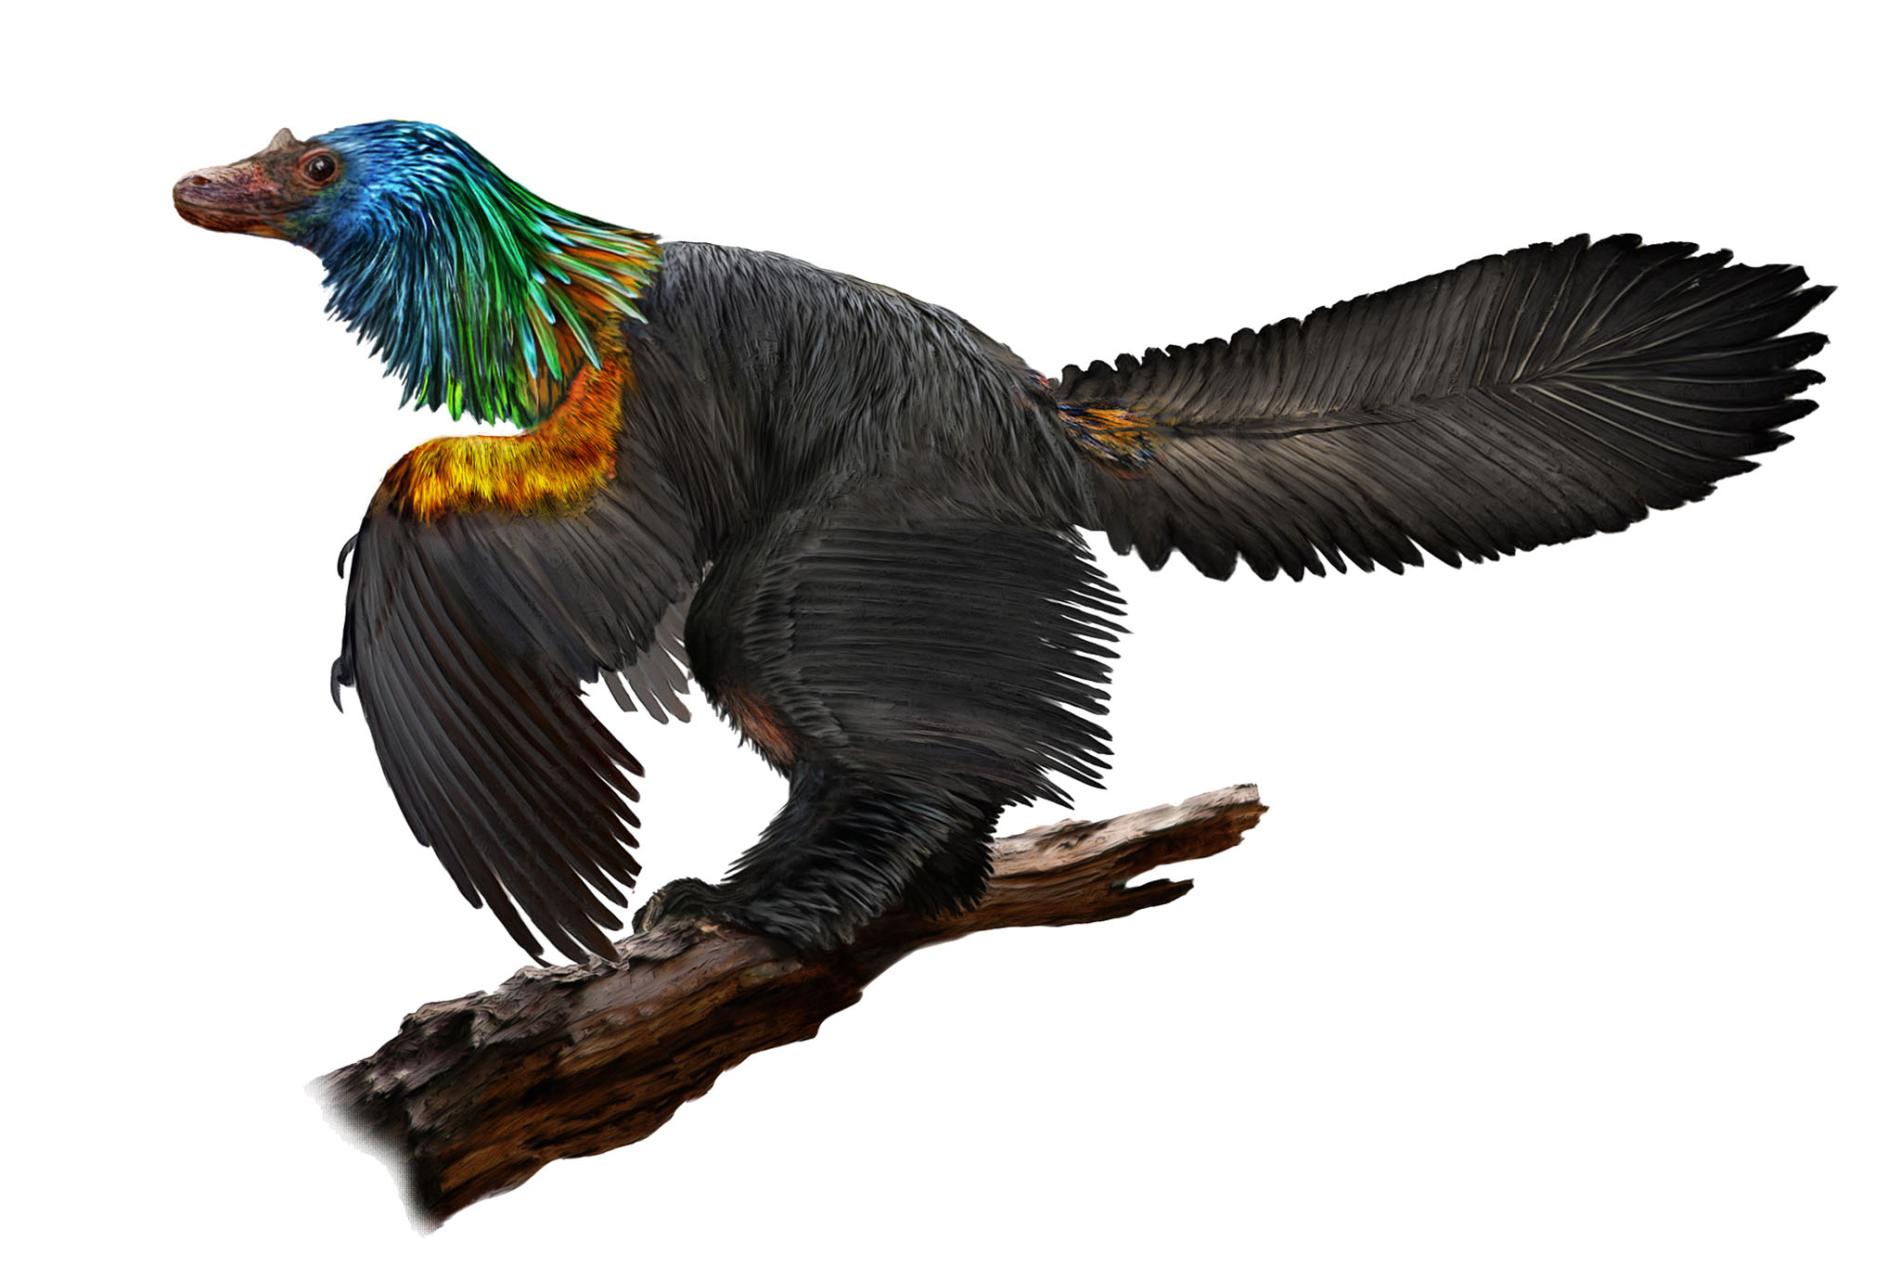 An artist's depiction of Caihong juji, a species of theropod dinosaur that lived 160 million years ago in what's now northeastern China.  ILLUSTRATION BY VELIZAR SIMEONOVSKI, THE FIELD MUSEUM